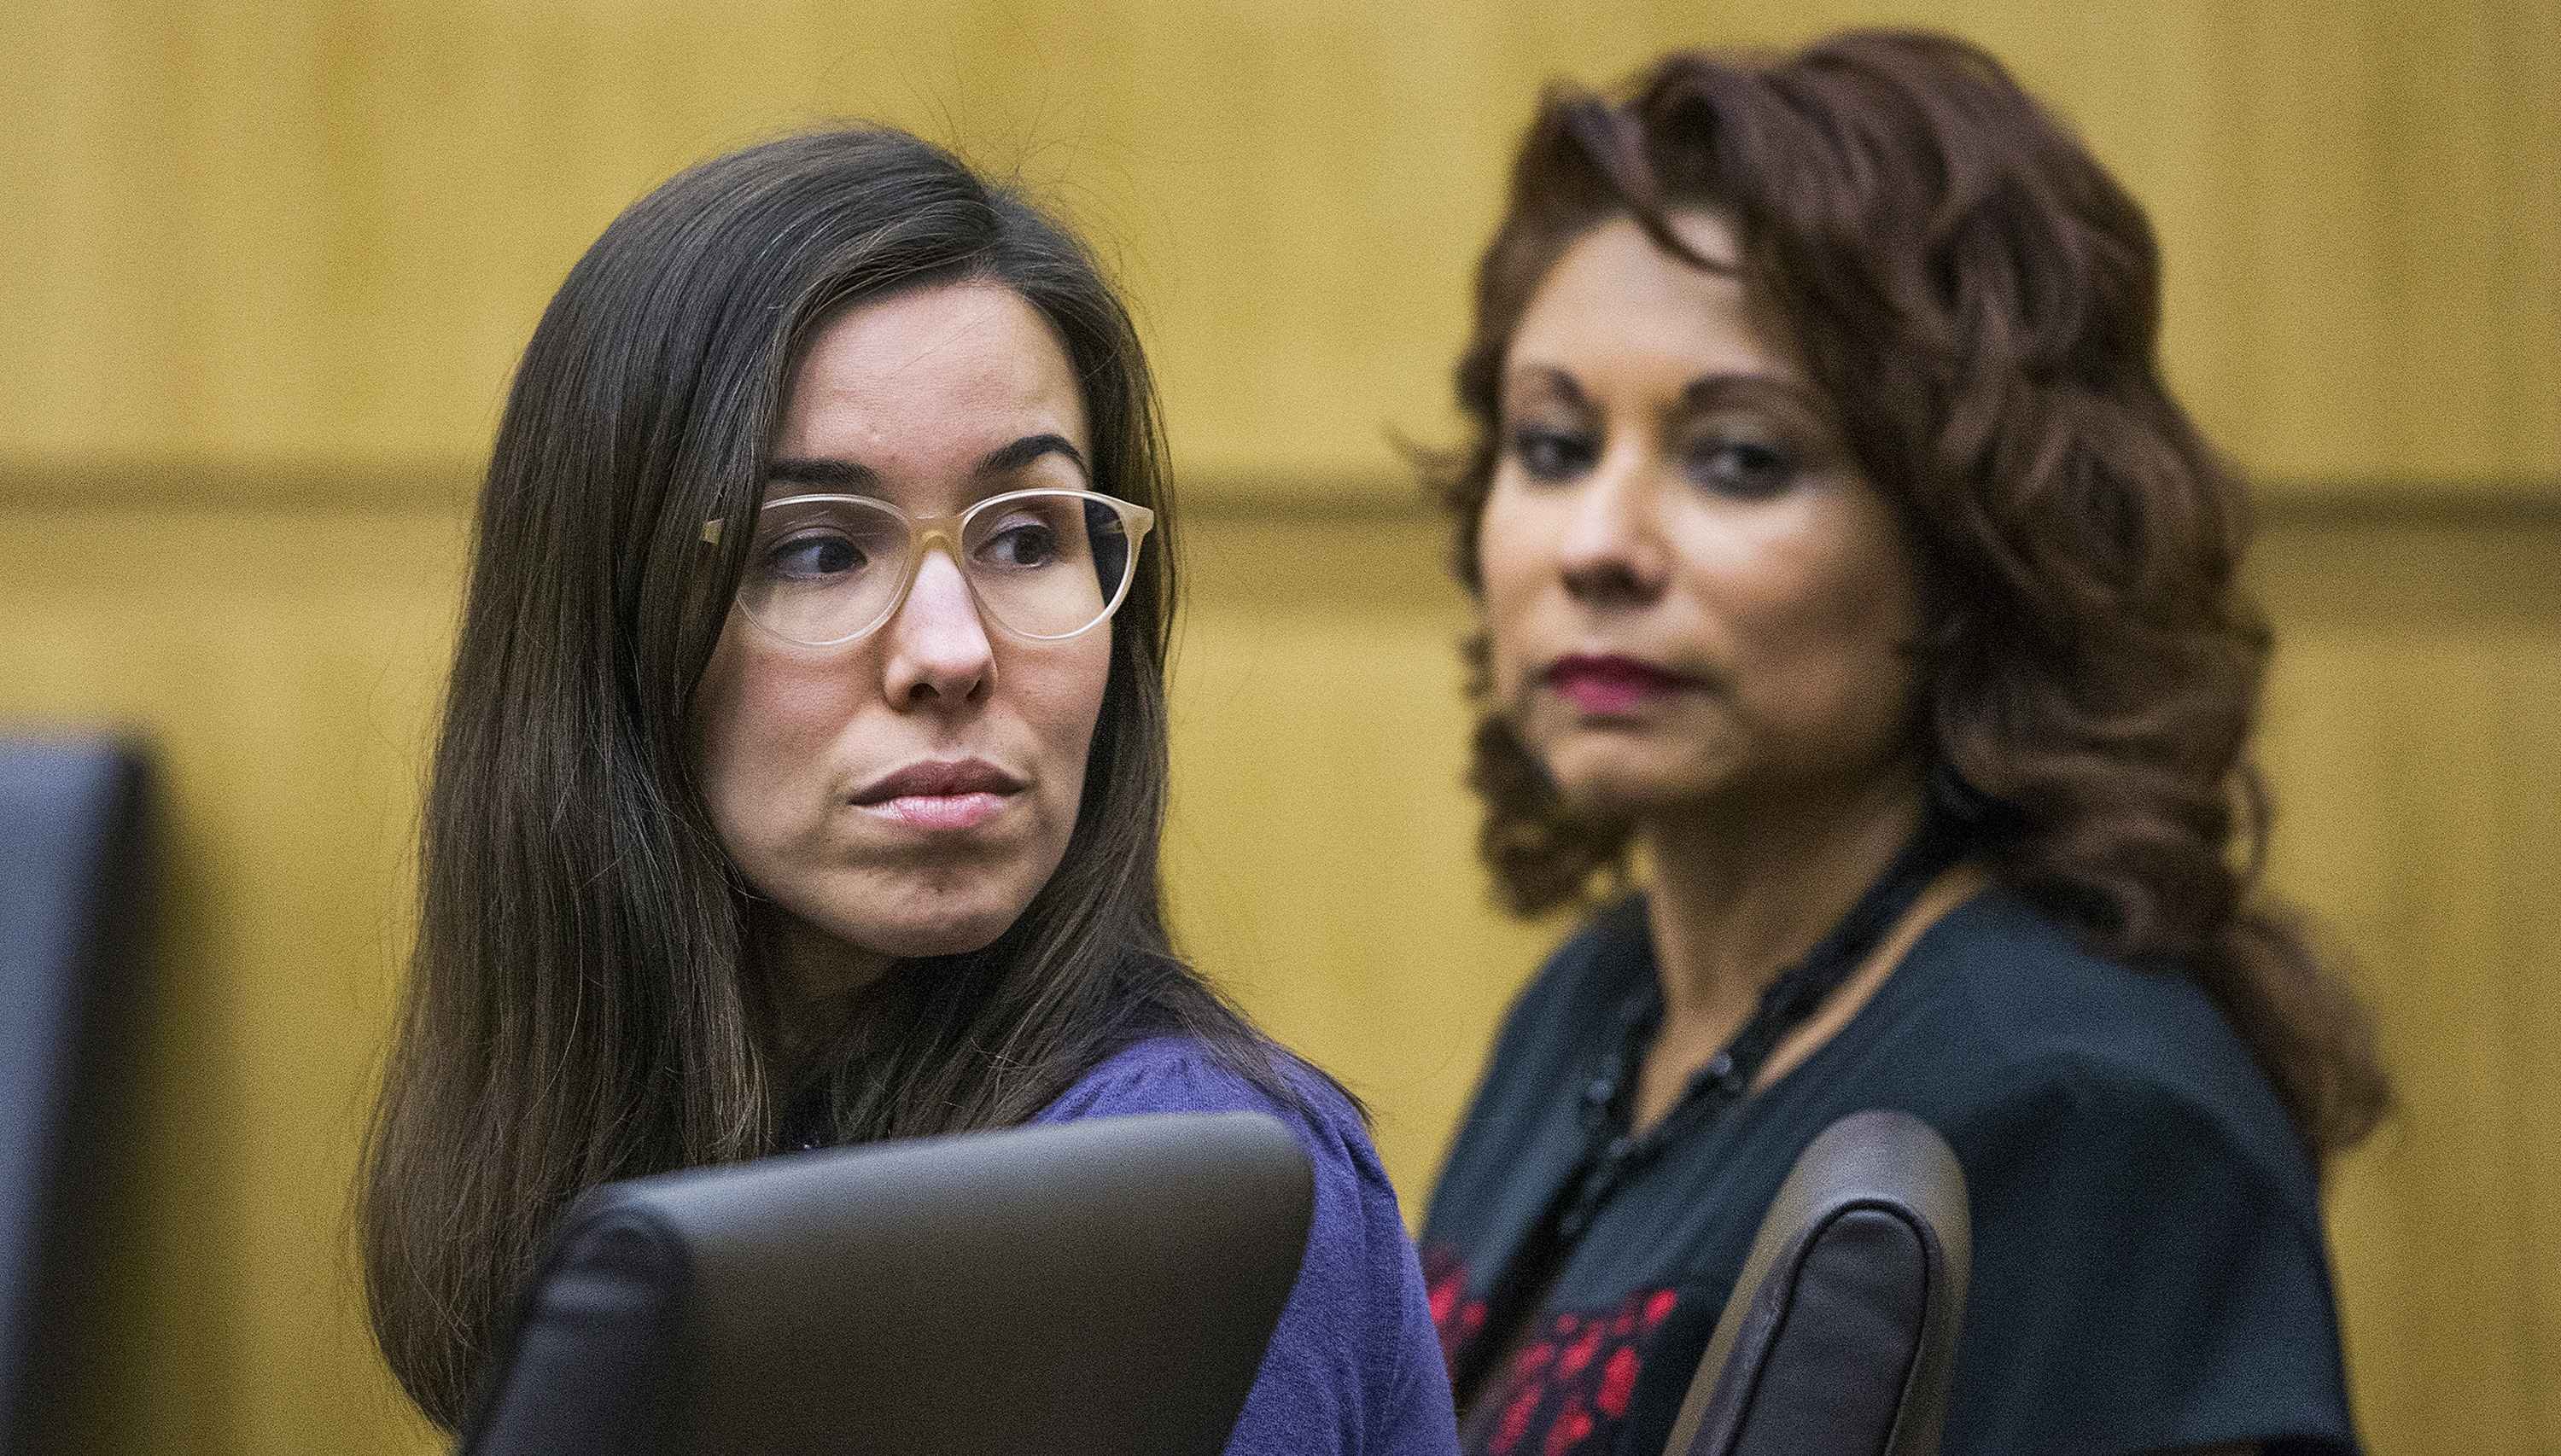 Jodi Arias looks toward the gallery during the sentencing phase retrial in Phoenix on March 3, 2015. (reuters)